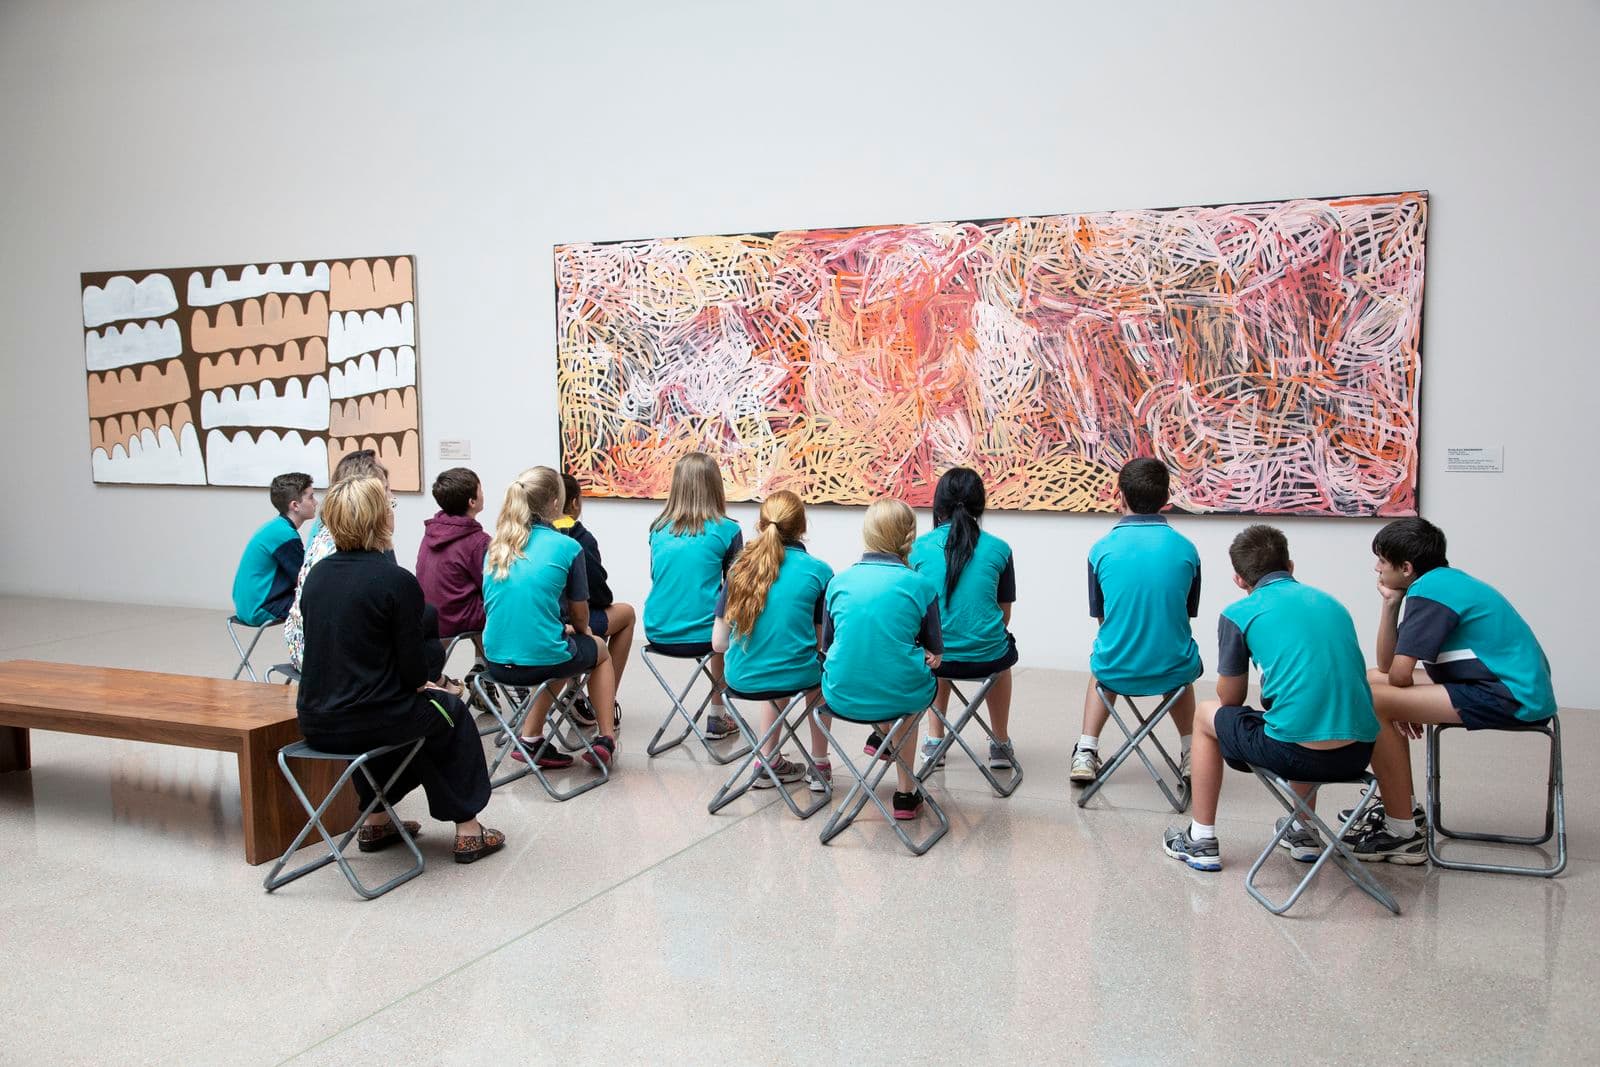 Small group of school children in the first nations galleries viewing Emily Kame Kngwarreye’s Yam awely.